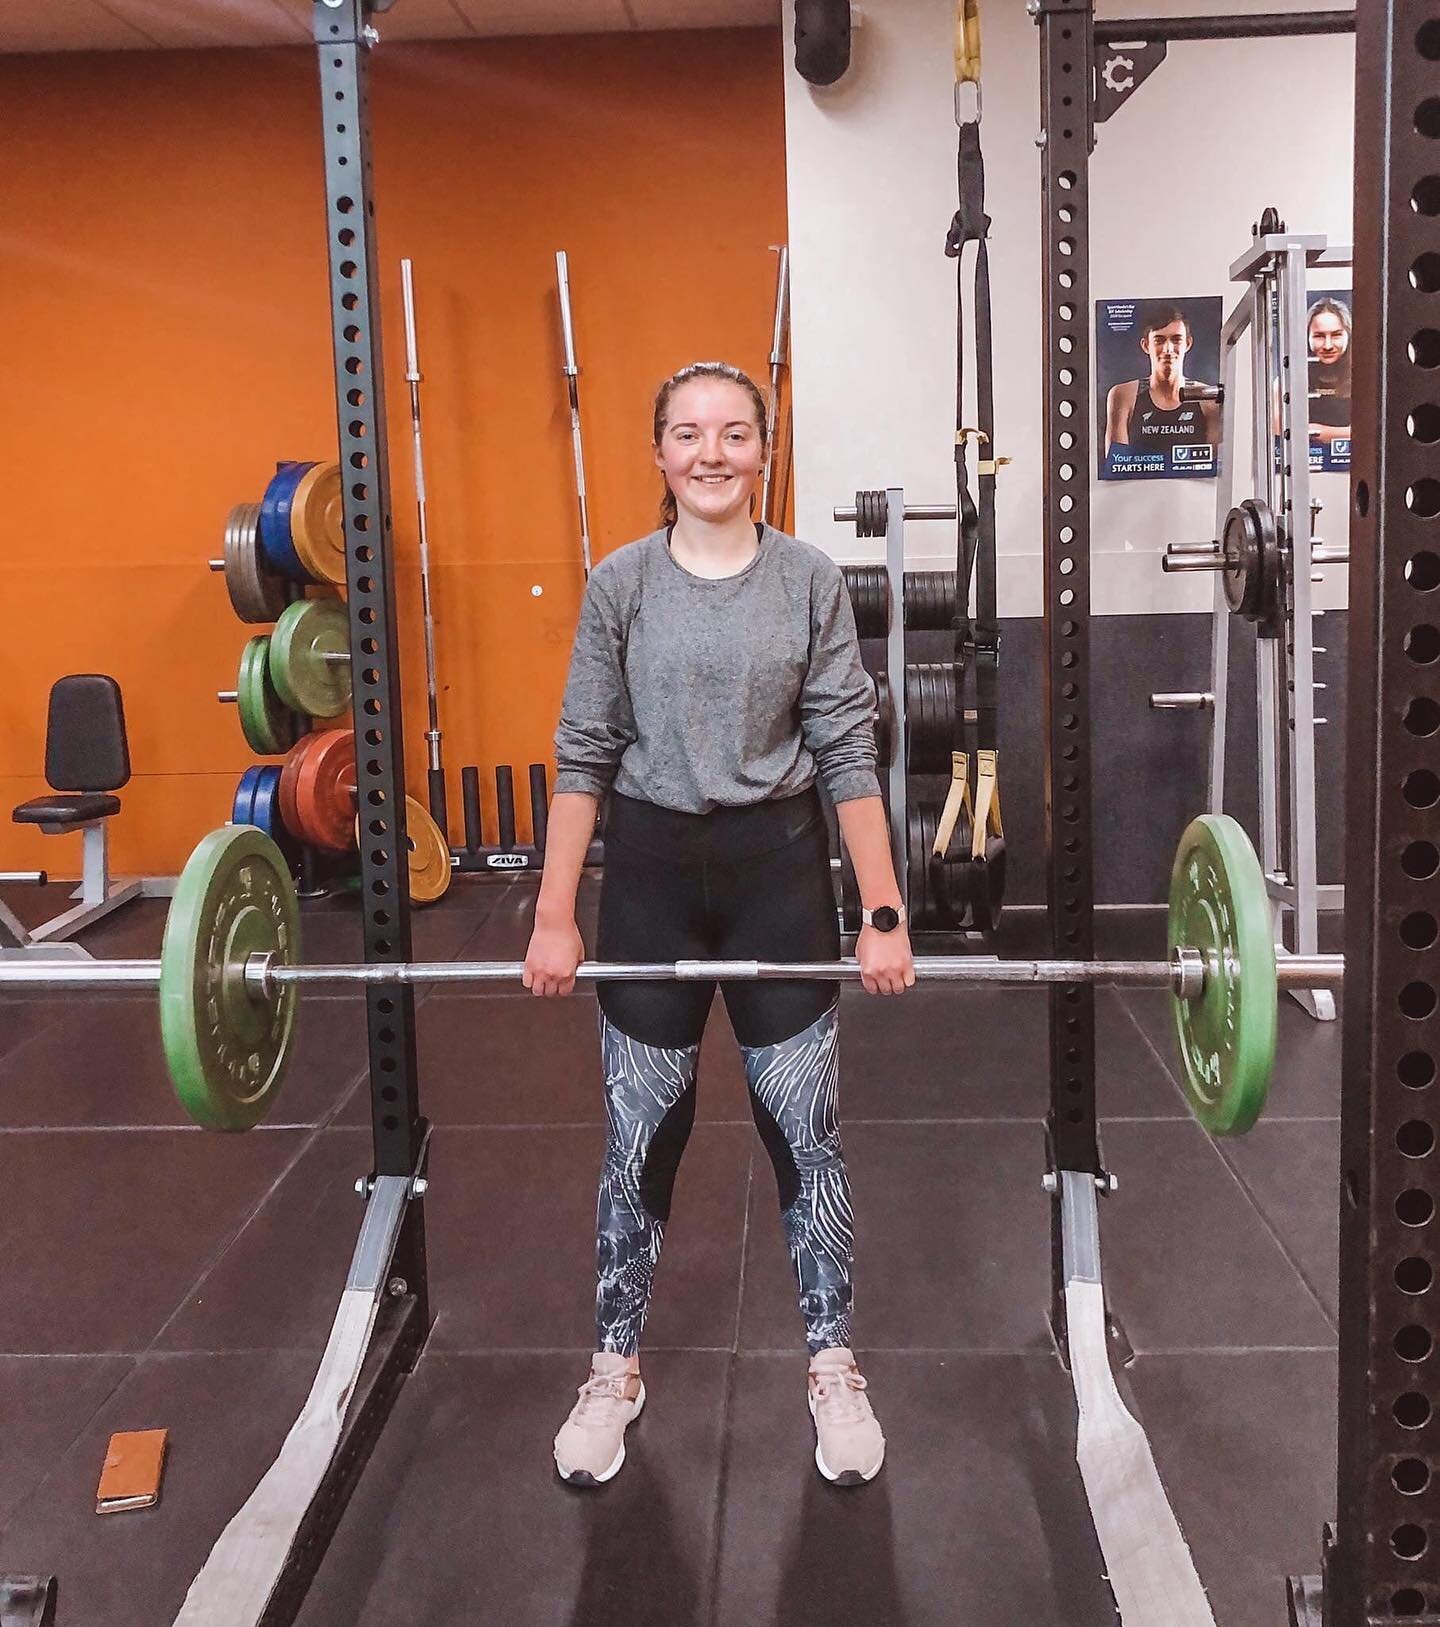 MEMBER INTERVIEW WITH AMY! 

Arena Gym: How long have you been member at Arena Gym?

Amy: I have been on and off for a few years &ndash; but I have been attending Arena gym consistently for about a year, and I plan to stick to it this time!
______
Ar